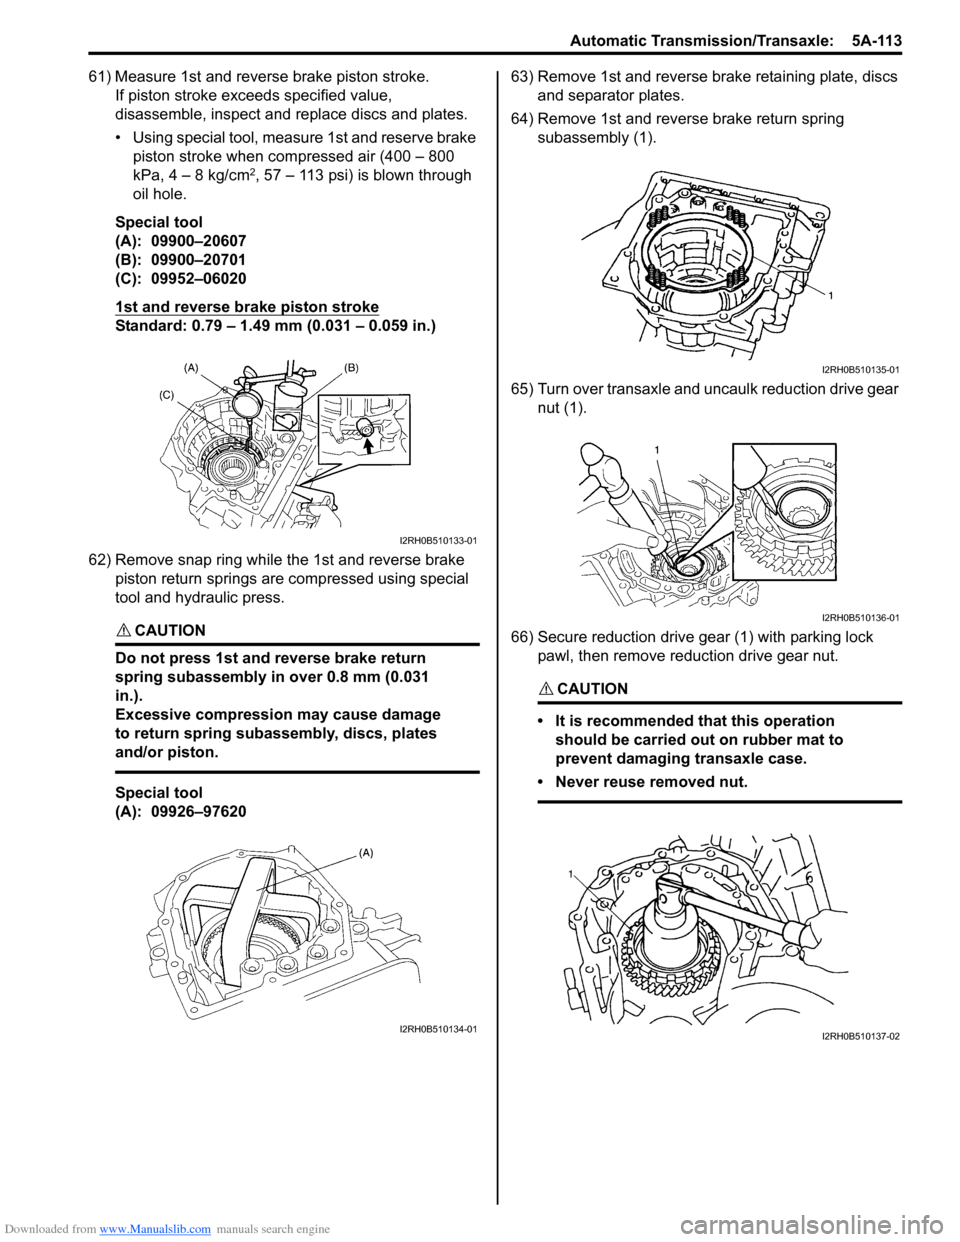 SUZUKI SX4 2006 1.G Service Workshop Manual Downloaded from www.Manualslib.com manuals search engine Automatic Transmission/Transaxle:  5A-113
61) Measure 1st and reverse brake piston stroke.
If piston stroke exceeds specified value, 
disassemb